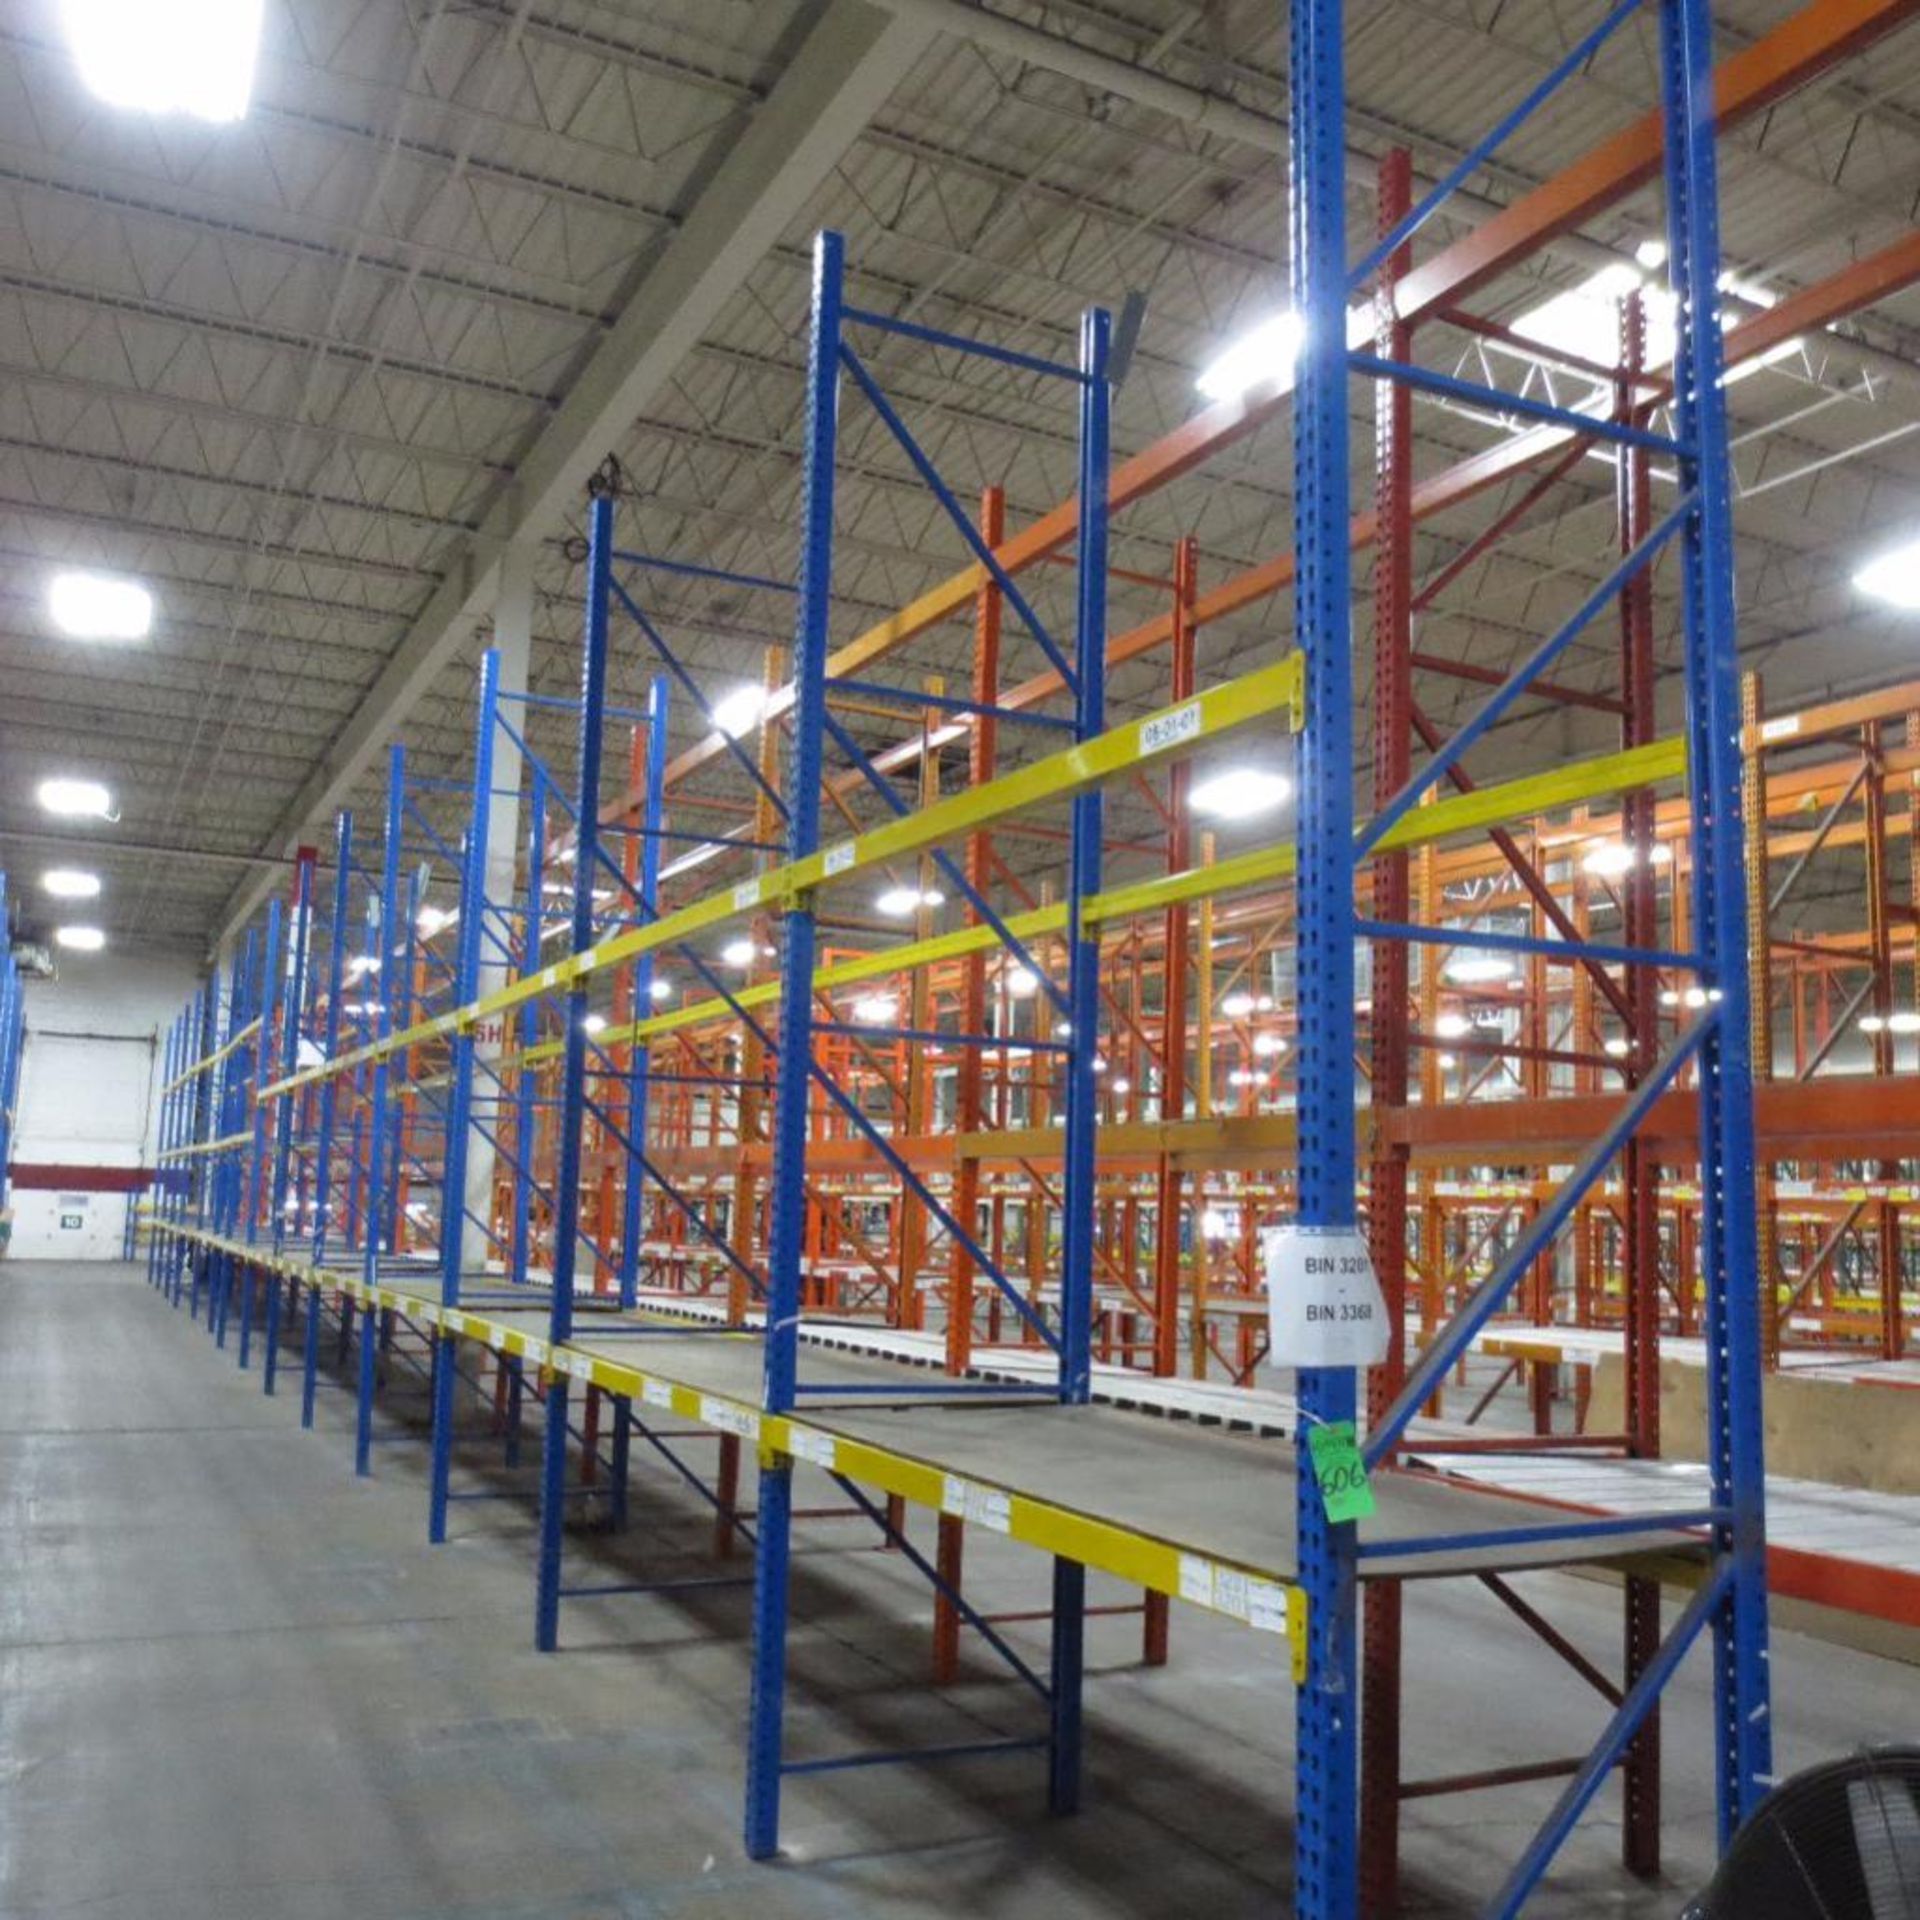 (14) Section of Pallet Racking, (15) Legs 16' X 42", Apx. 70 Cross Beams 8'